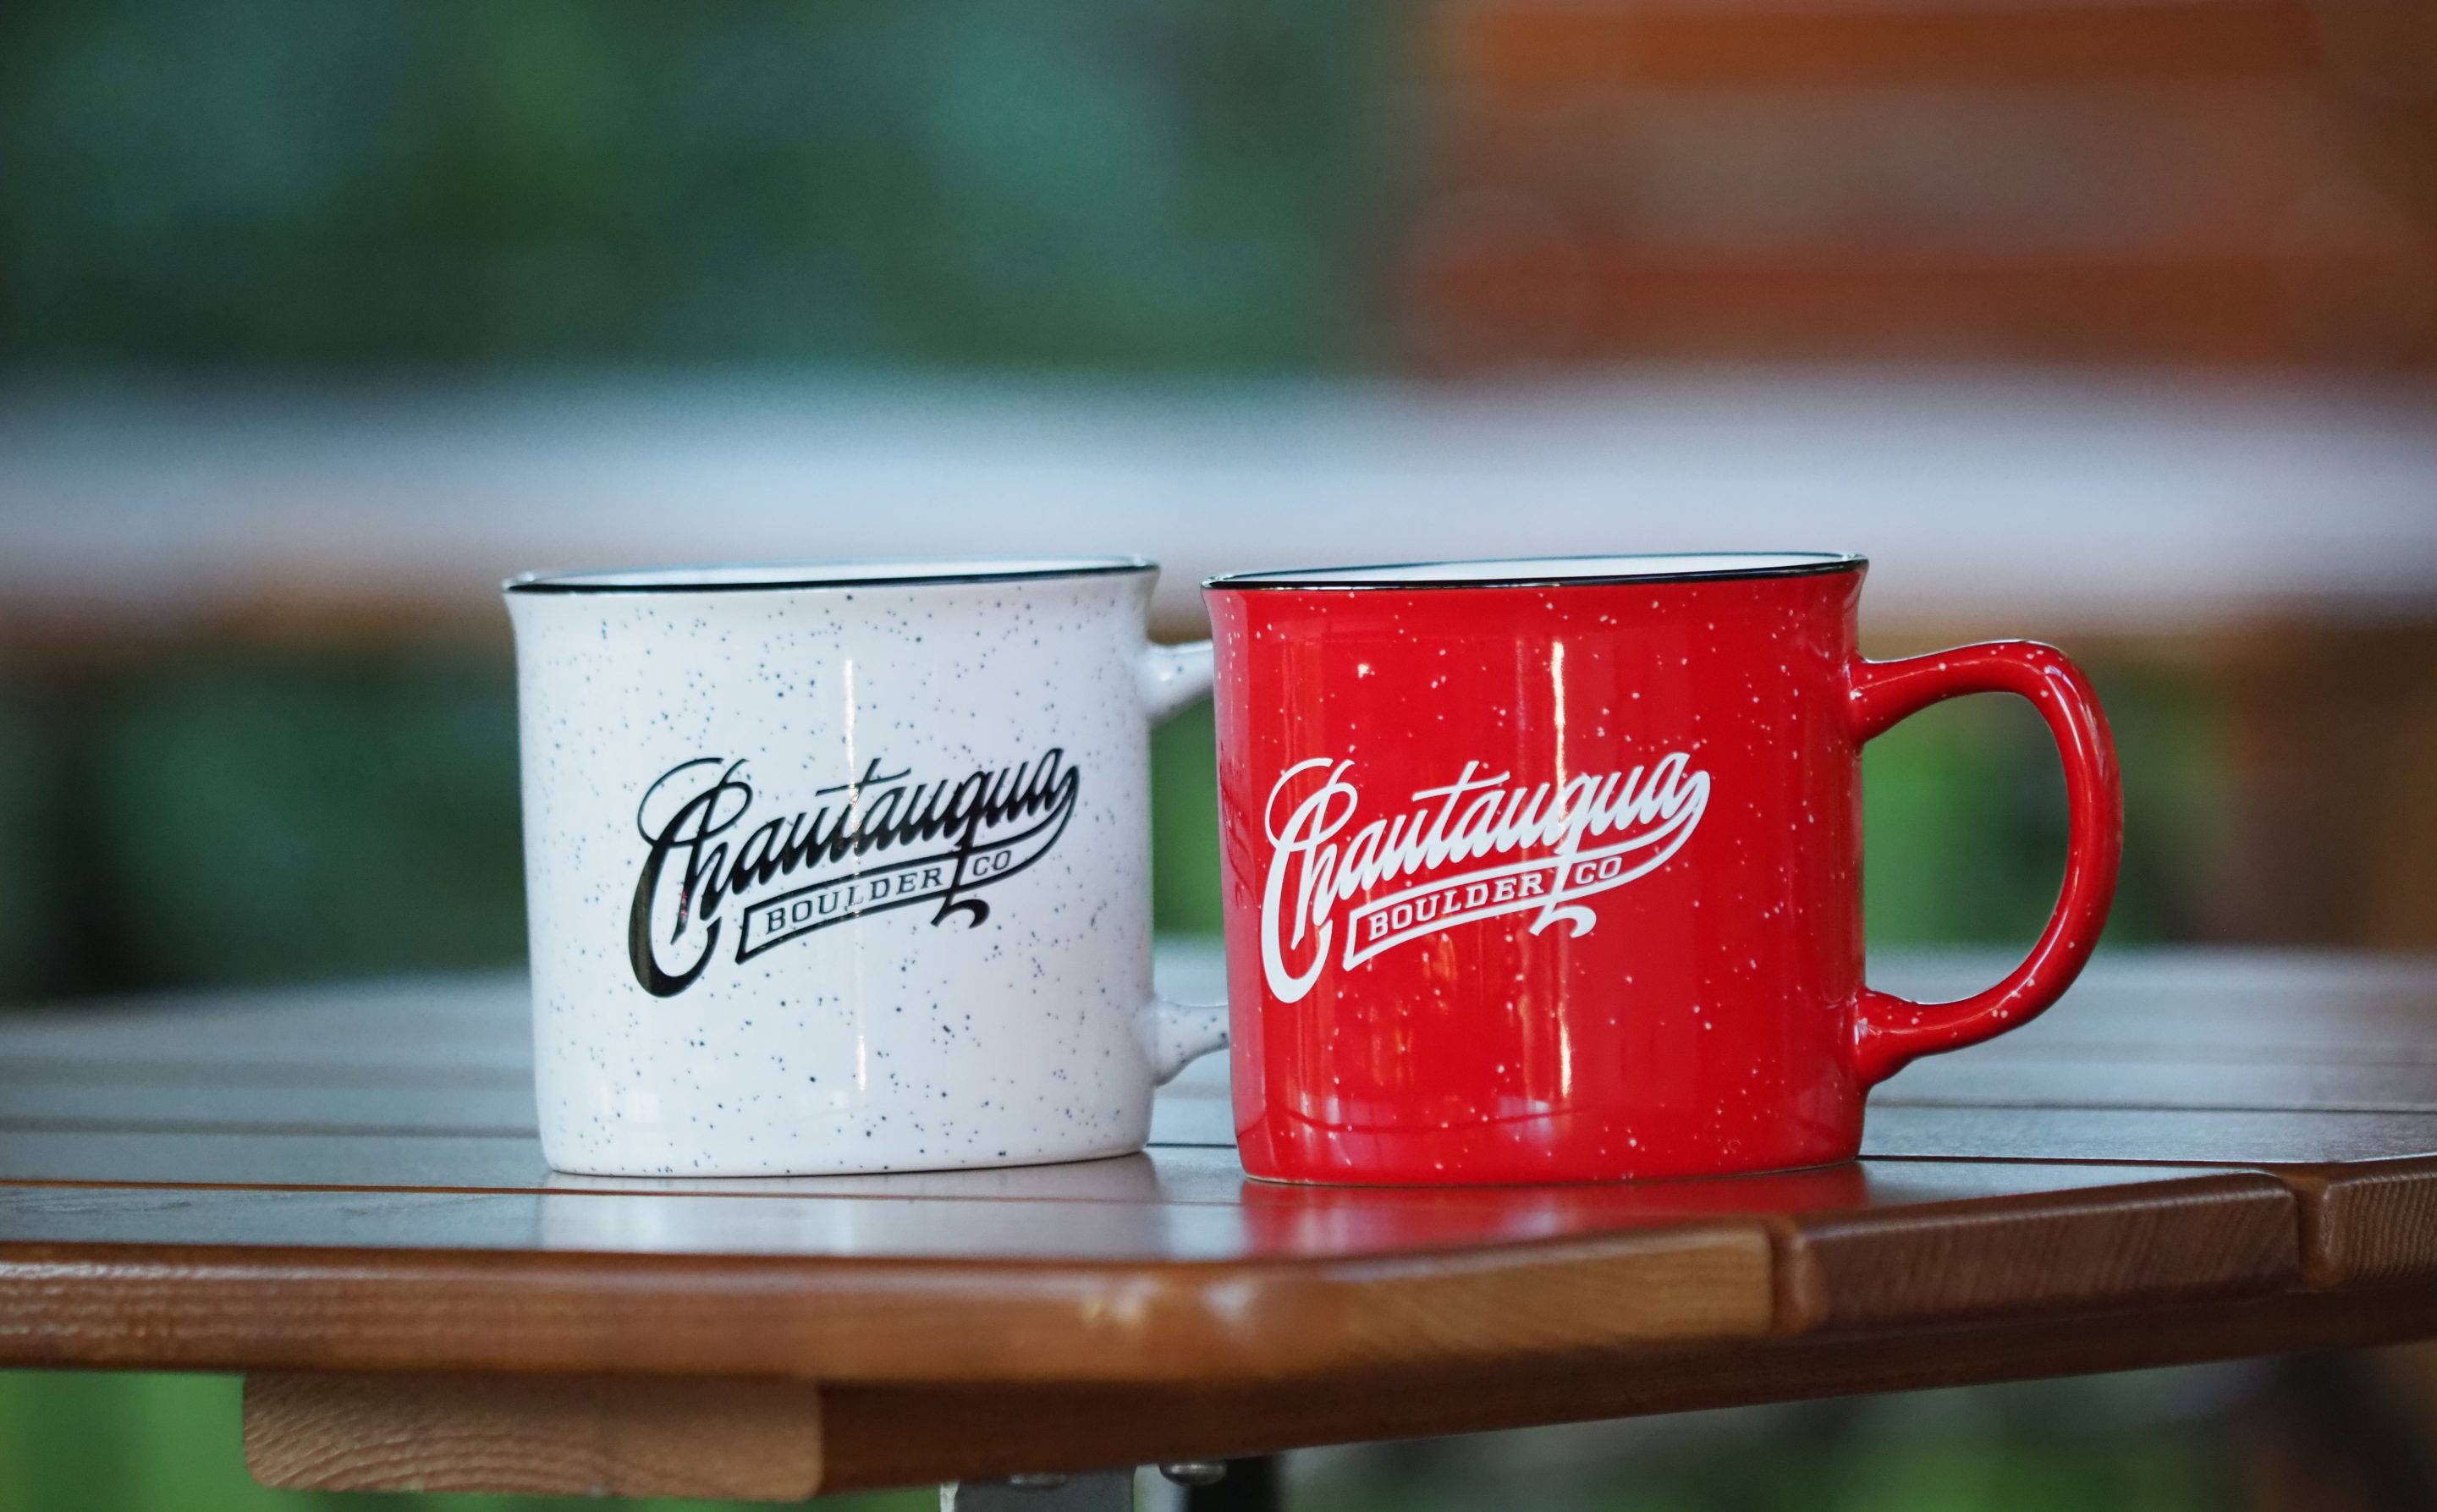 Chautauqua branded coffee mugs hanging up in the General Store